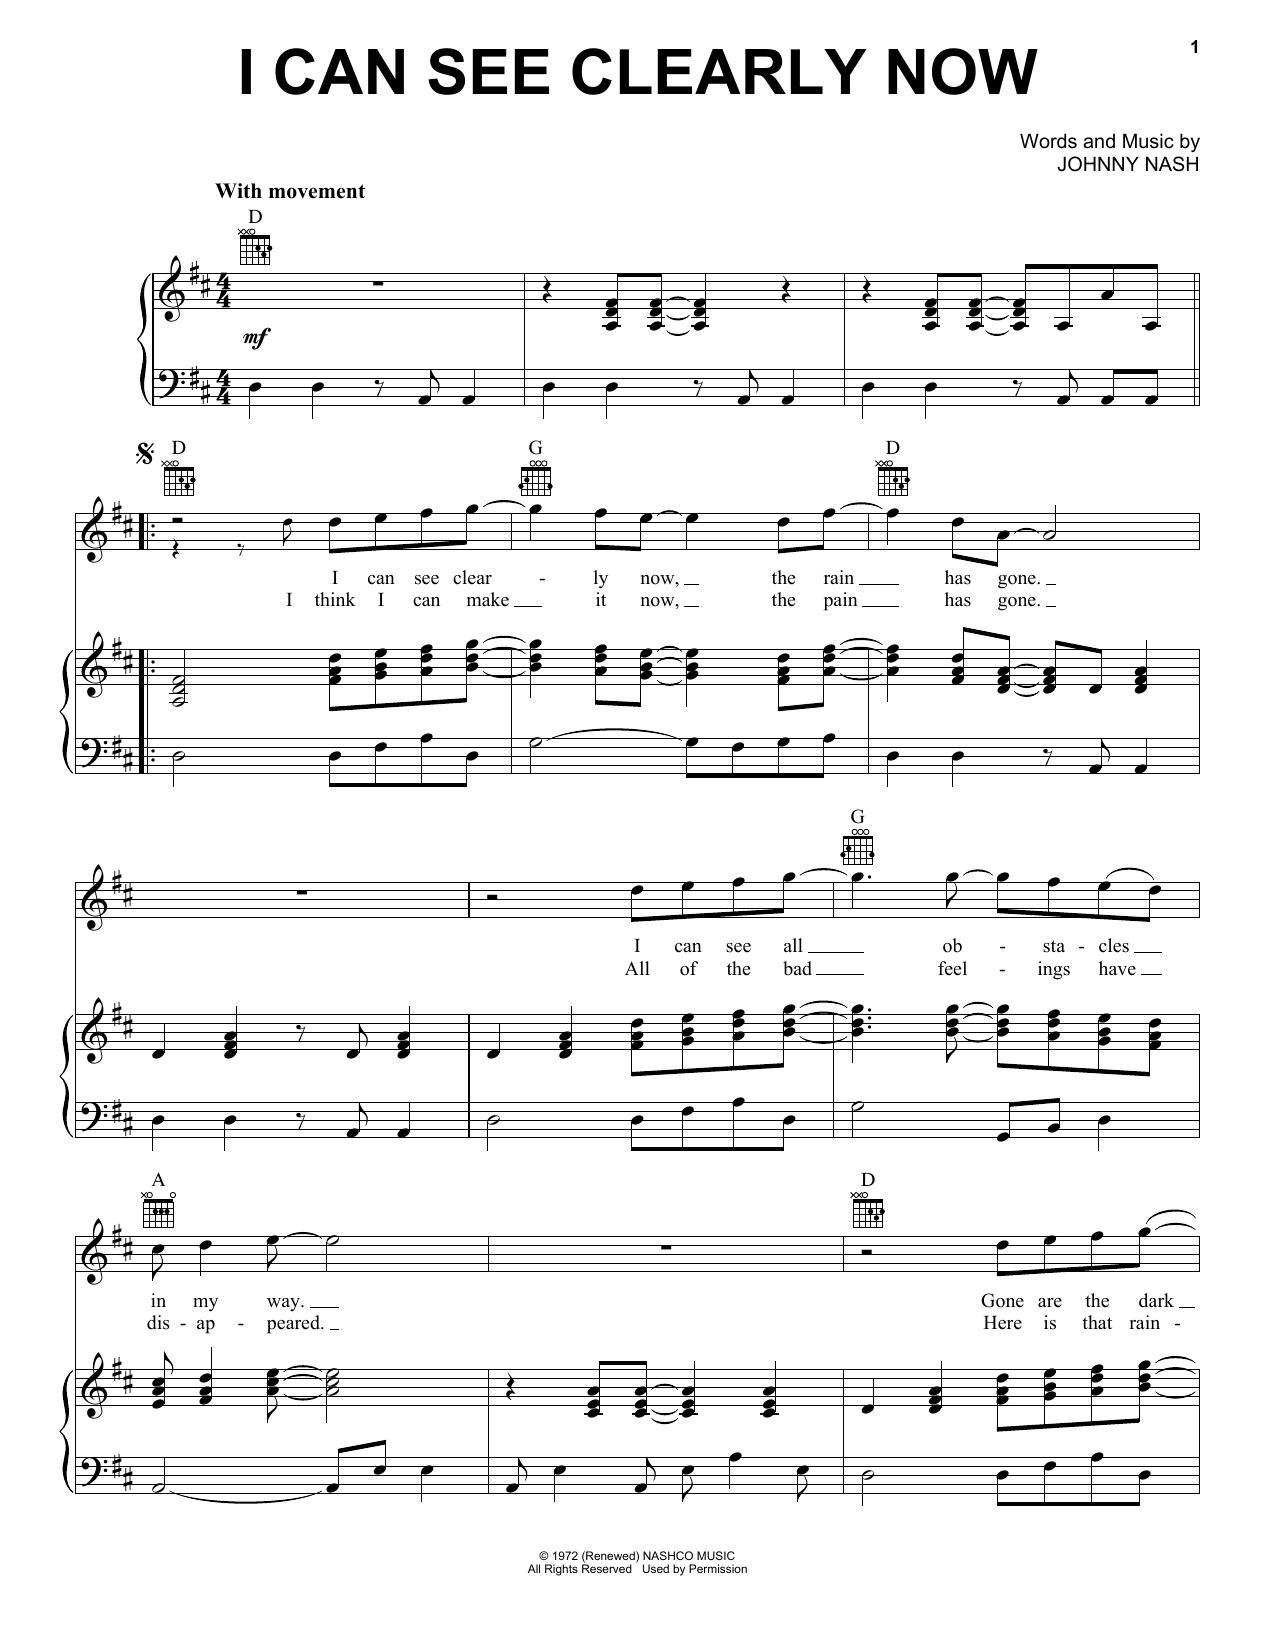 Jimmy Cliff I Can See Clearly Now sheet music notes and chords. Download Printable PDF.